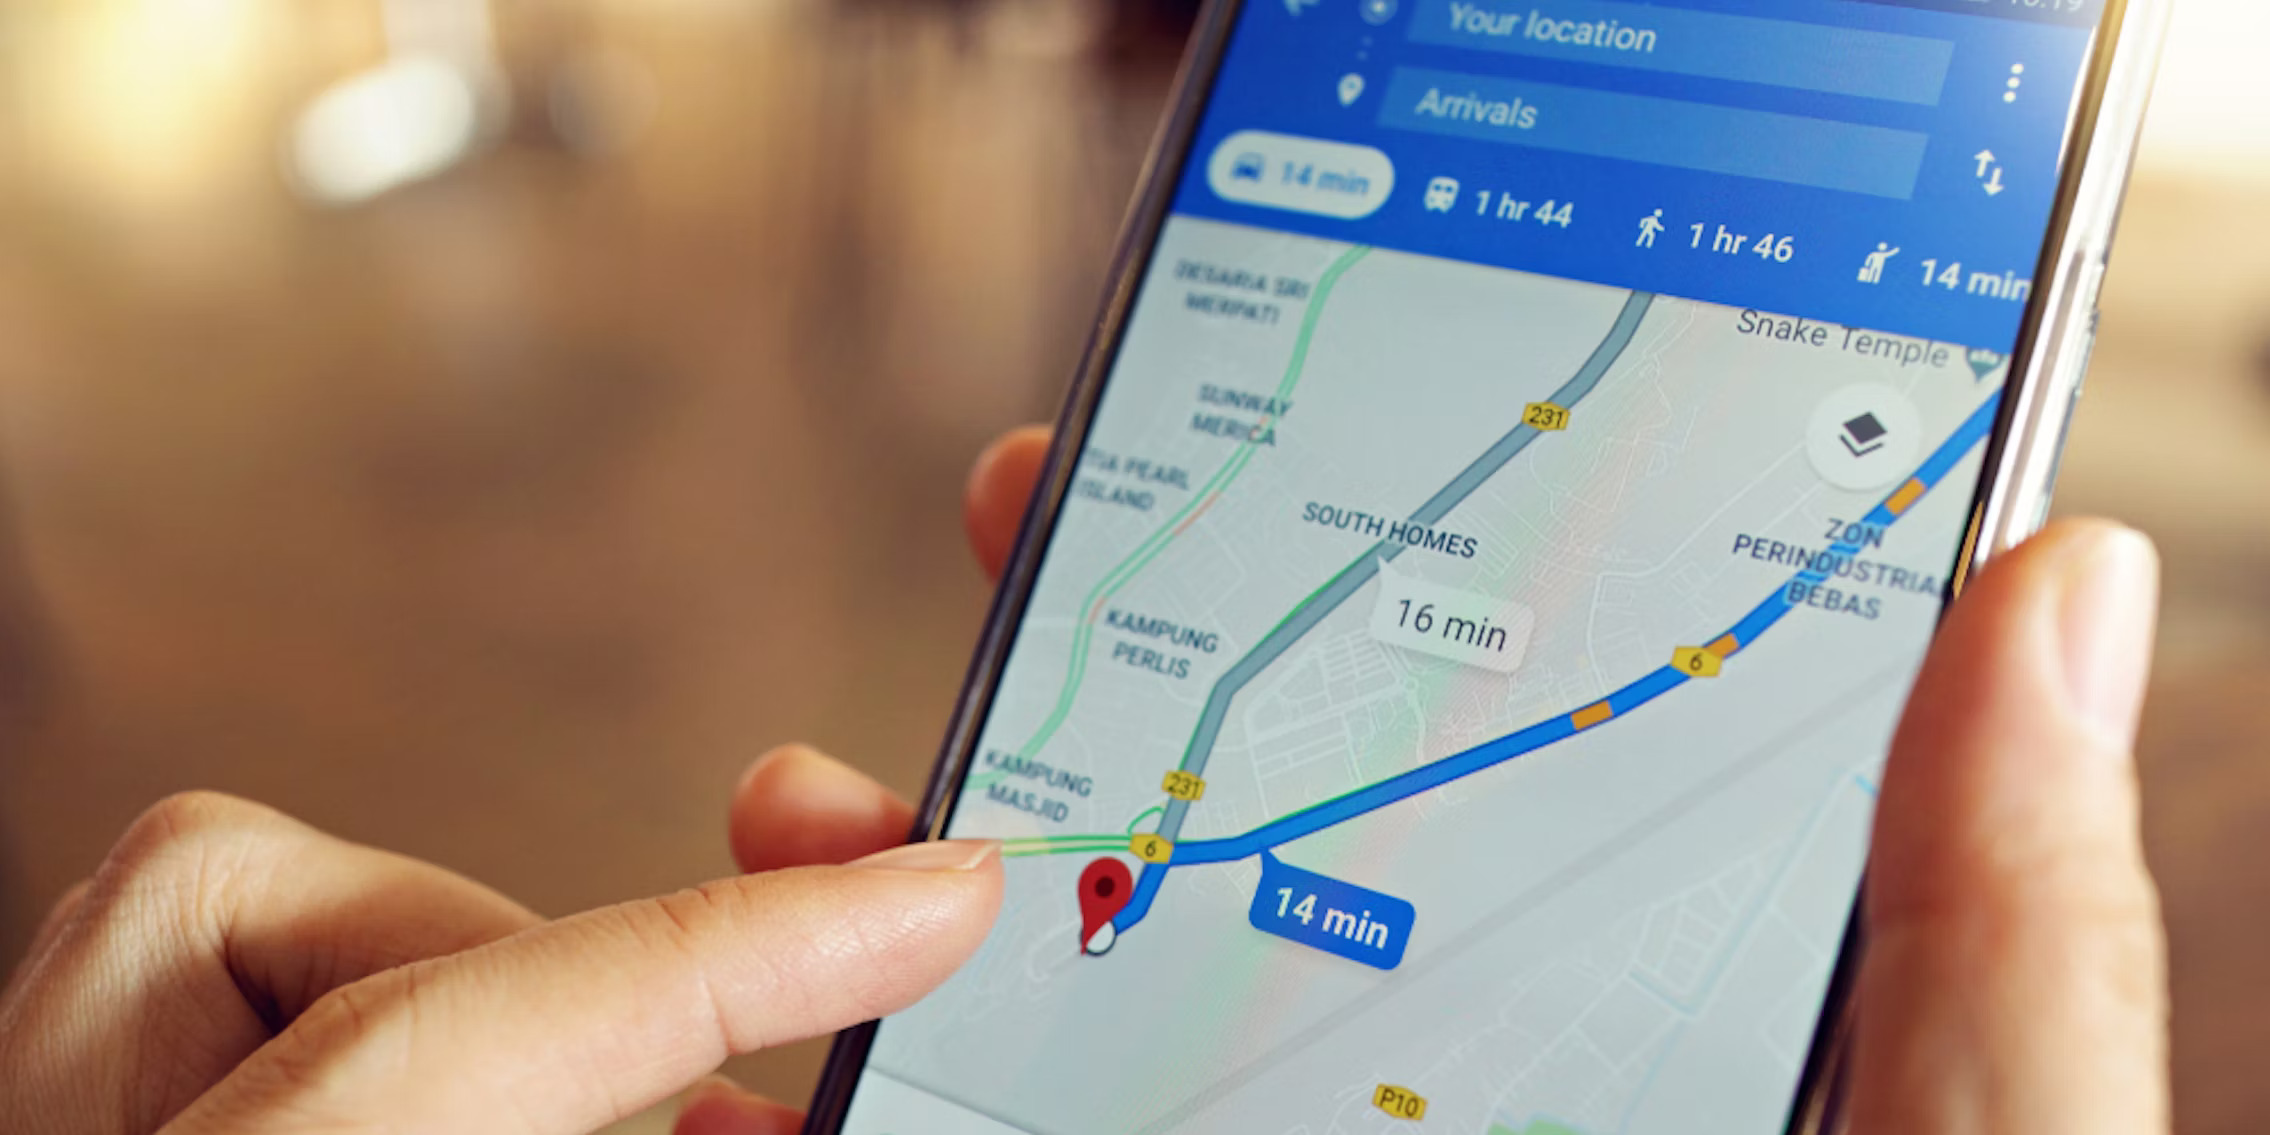 How To Share Your Location Using Google Maps